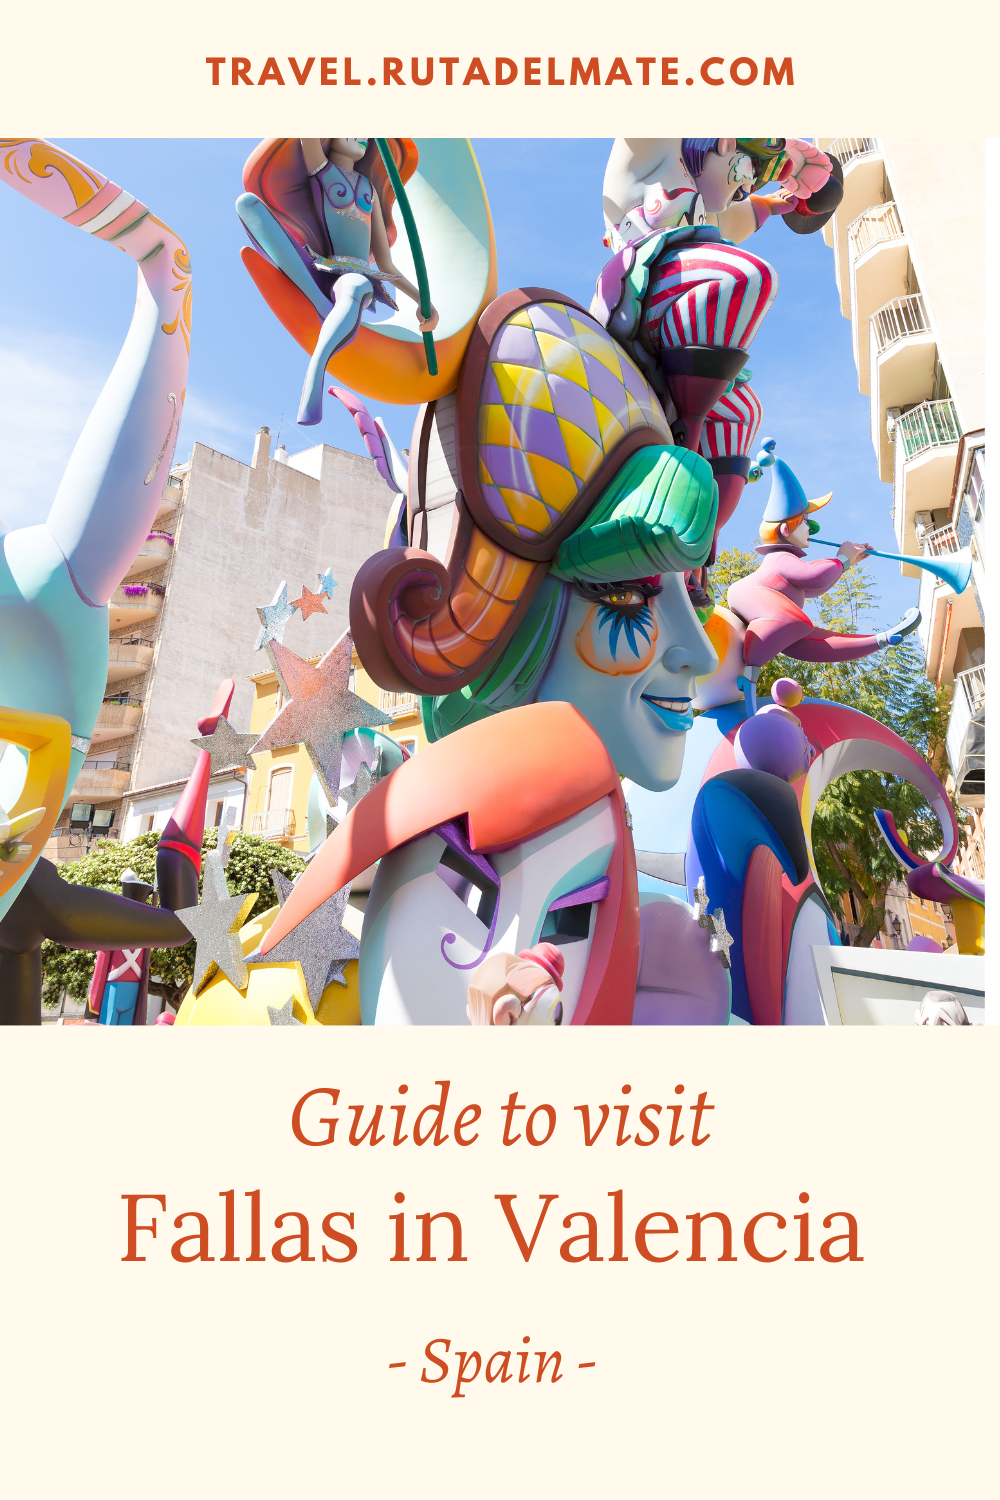 Guide to visit the Fallas of Valencia